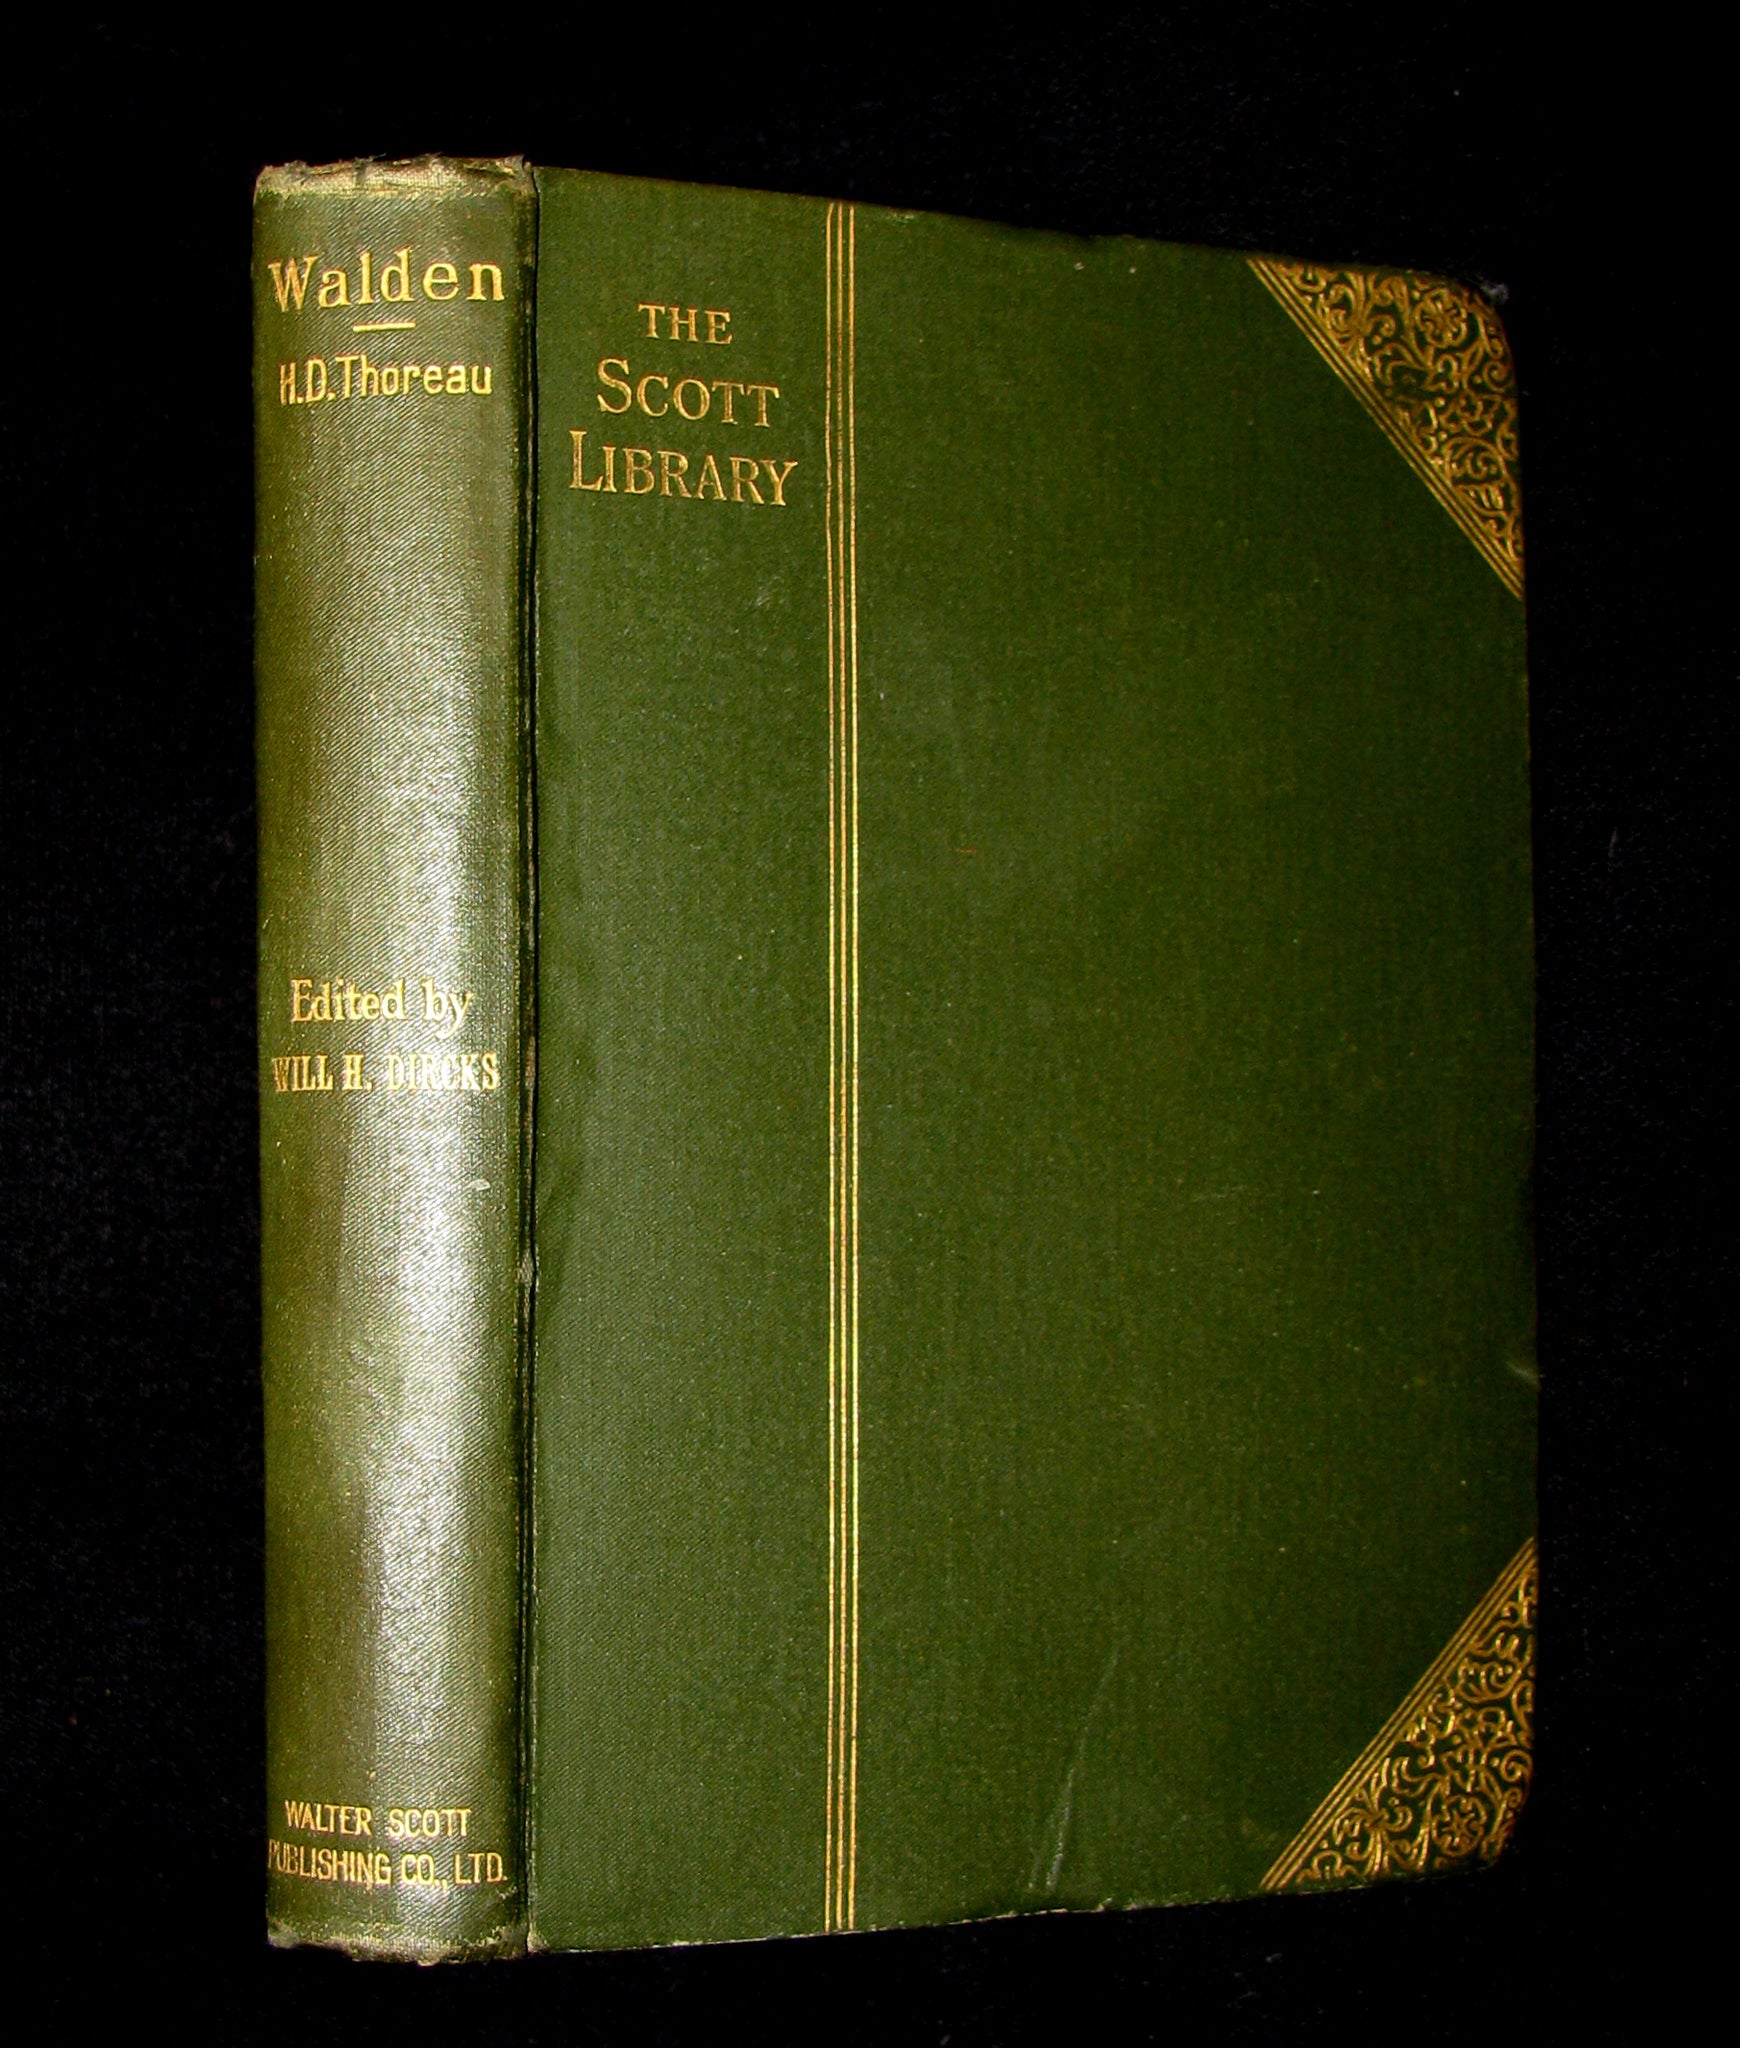 1886 Rare Victorian Book - WALDEN or, Life in the Woods by Henry David Thoreau